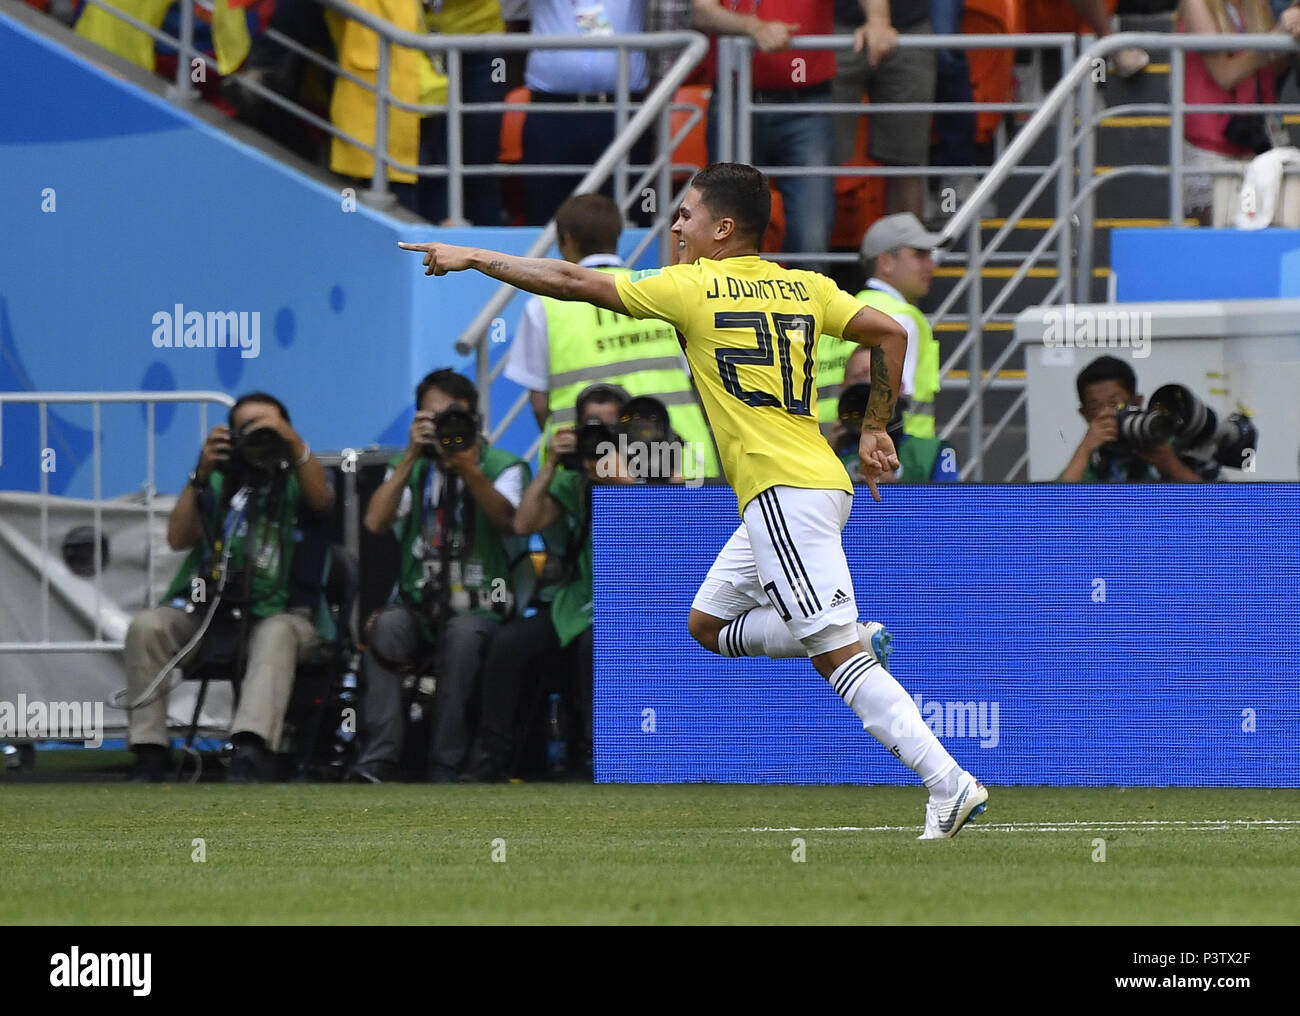 Saransk, Russia. 19th June, 2018. Juan Quintero of Colombia celebrates his scoring during a Group H match between Colombia and Japan at the 2018 FIFA World Cup in Saransk, Russia, June 19, 2018. Credit: He Canling/Xinhua/Alamy Live News Stock Photo